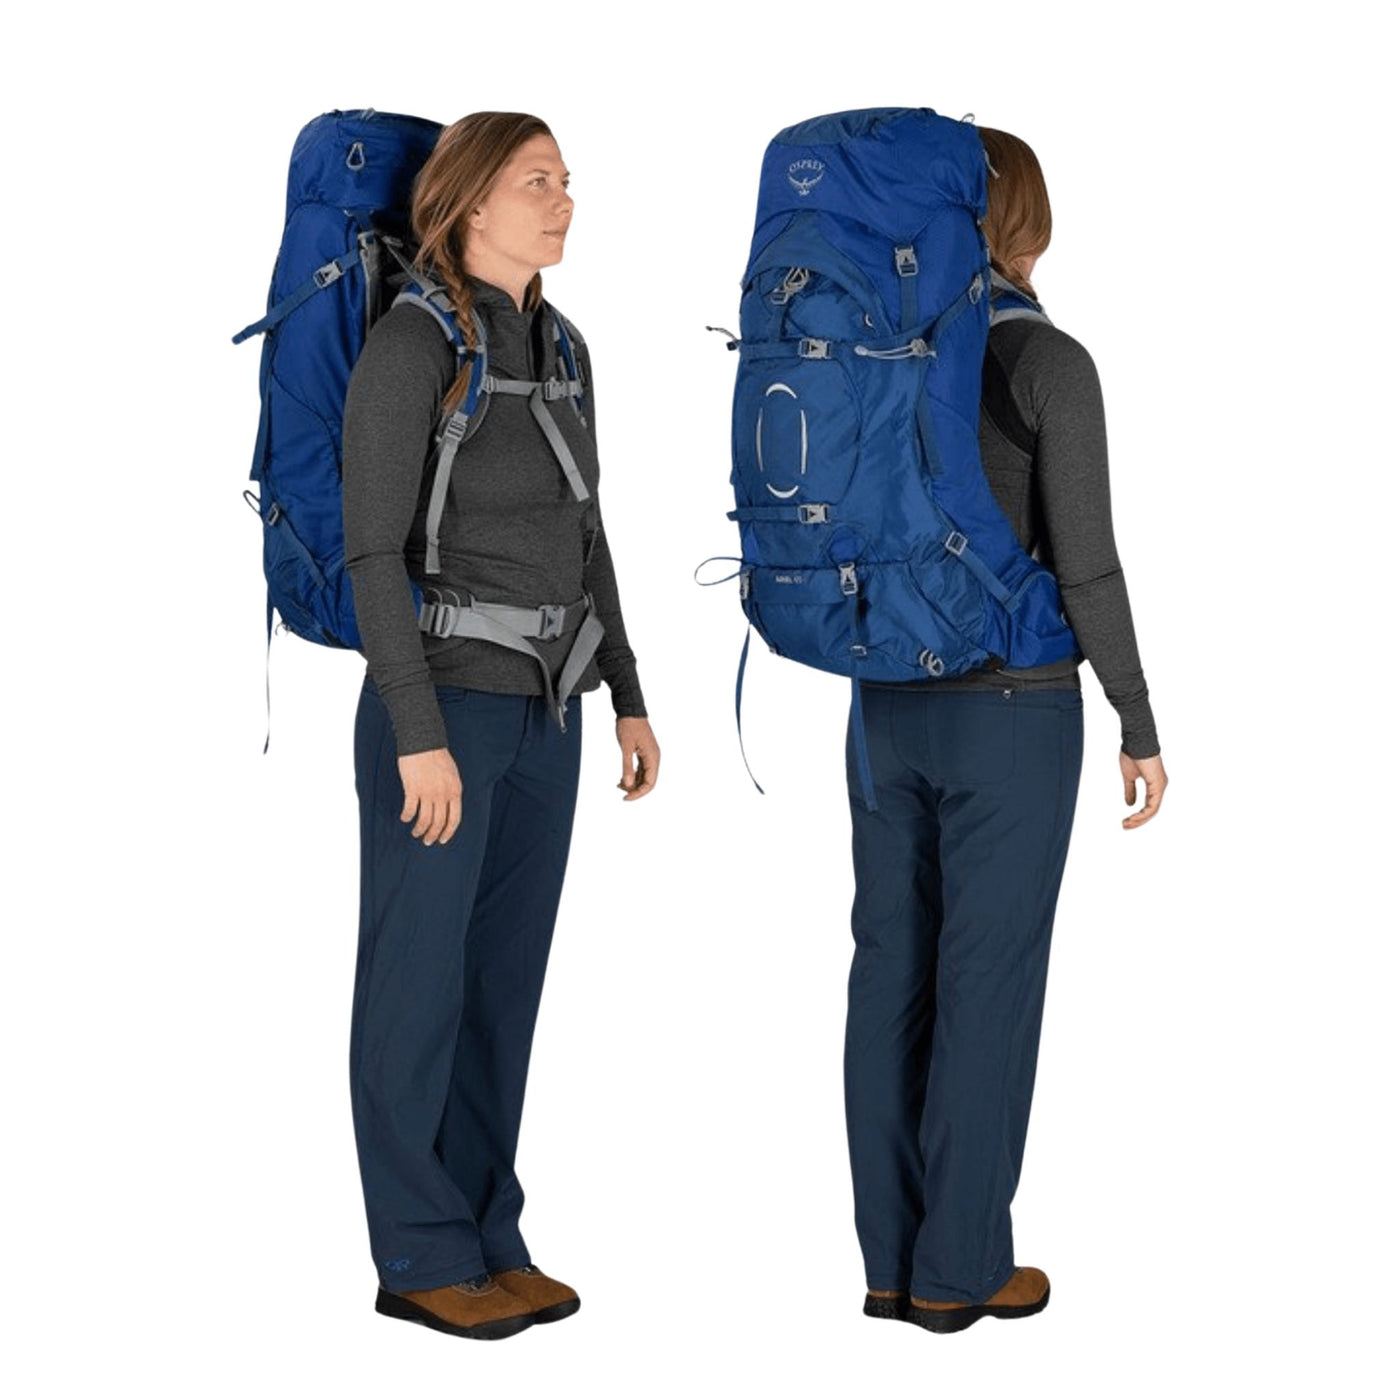 Osprey Ariel 65 Pack Womens NZ | Hiking and Tramping Pack for Women | Further Faster Christchurch NZ #ceramic-blue